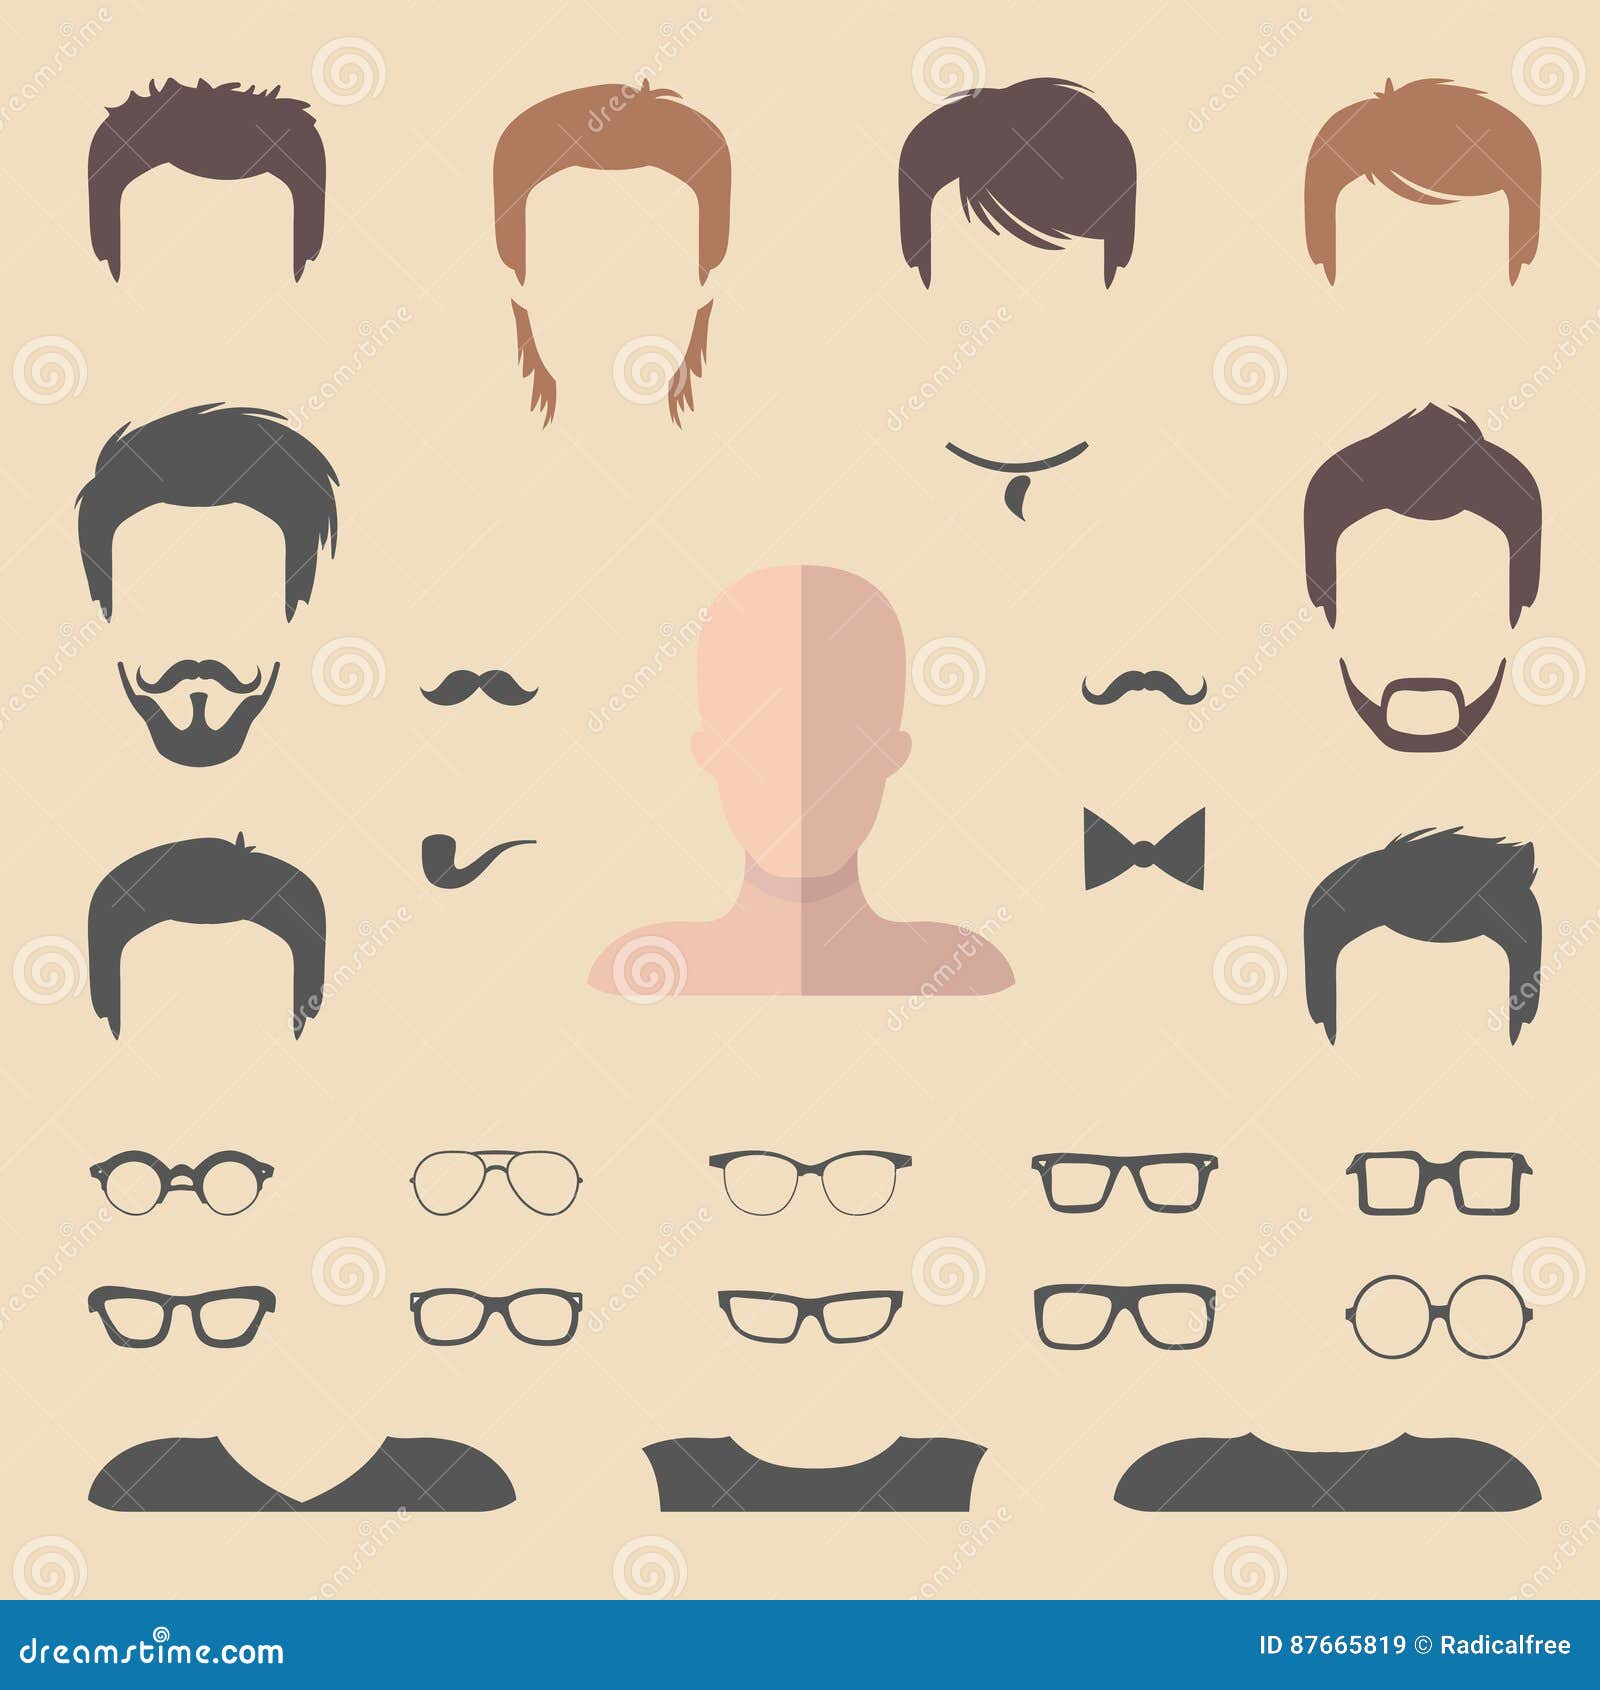 Big Vector Set of Flat Dress Up Constructor with Different Men Haircuts,  Glasses, Beard Etc. Male Faces Icon Creator Stock Vector - Illustration of  person, flat: 87665819